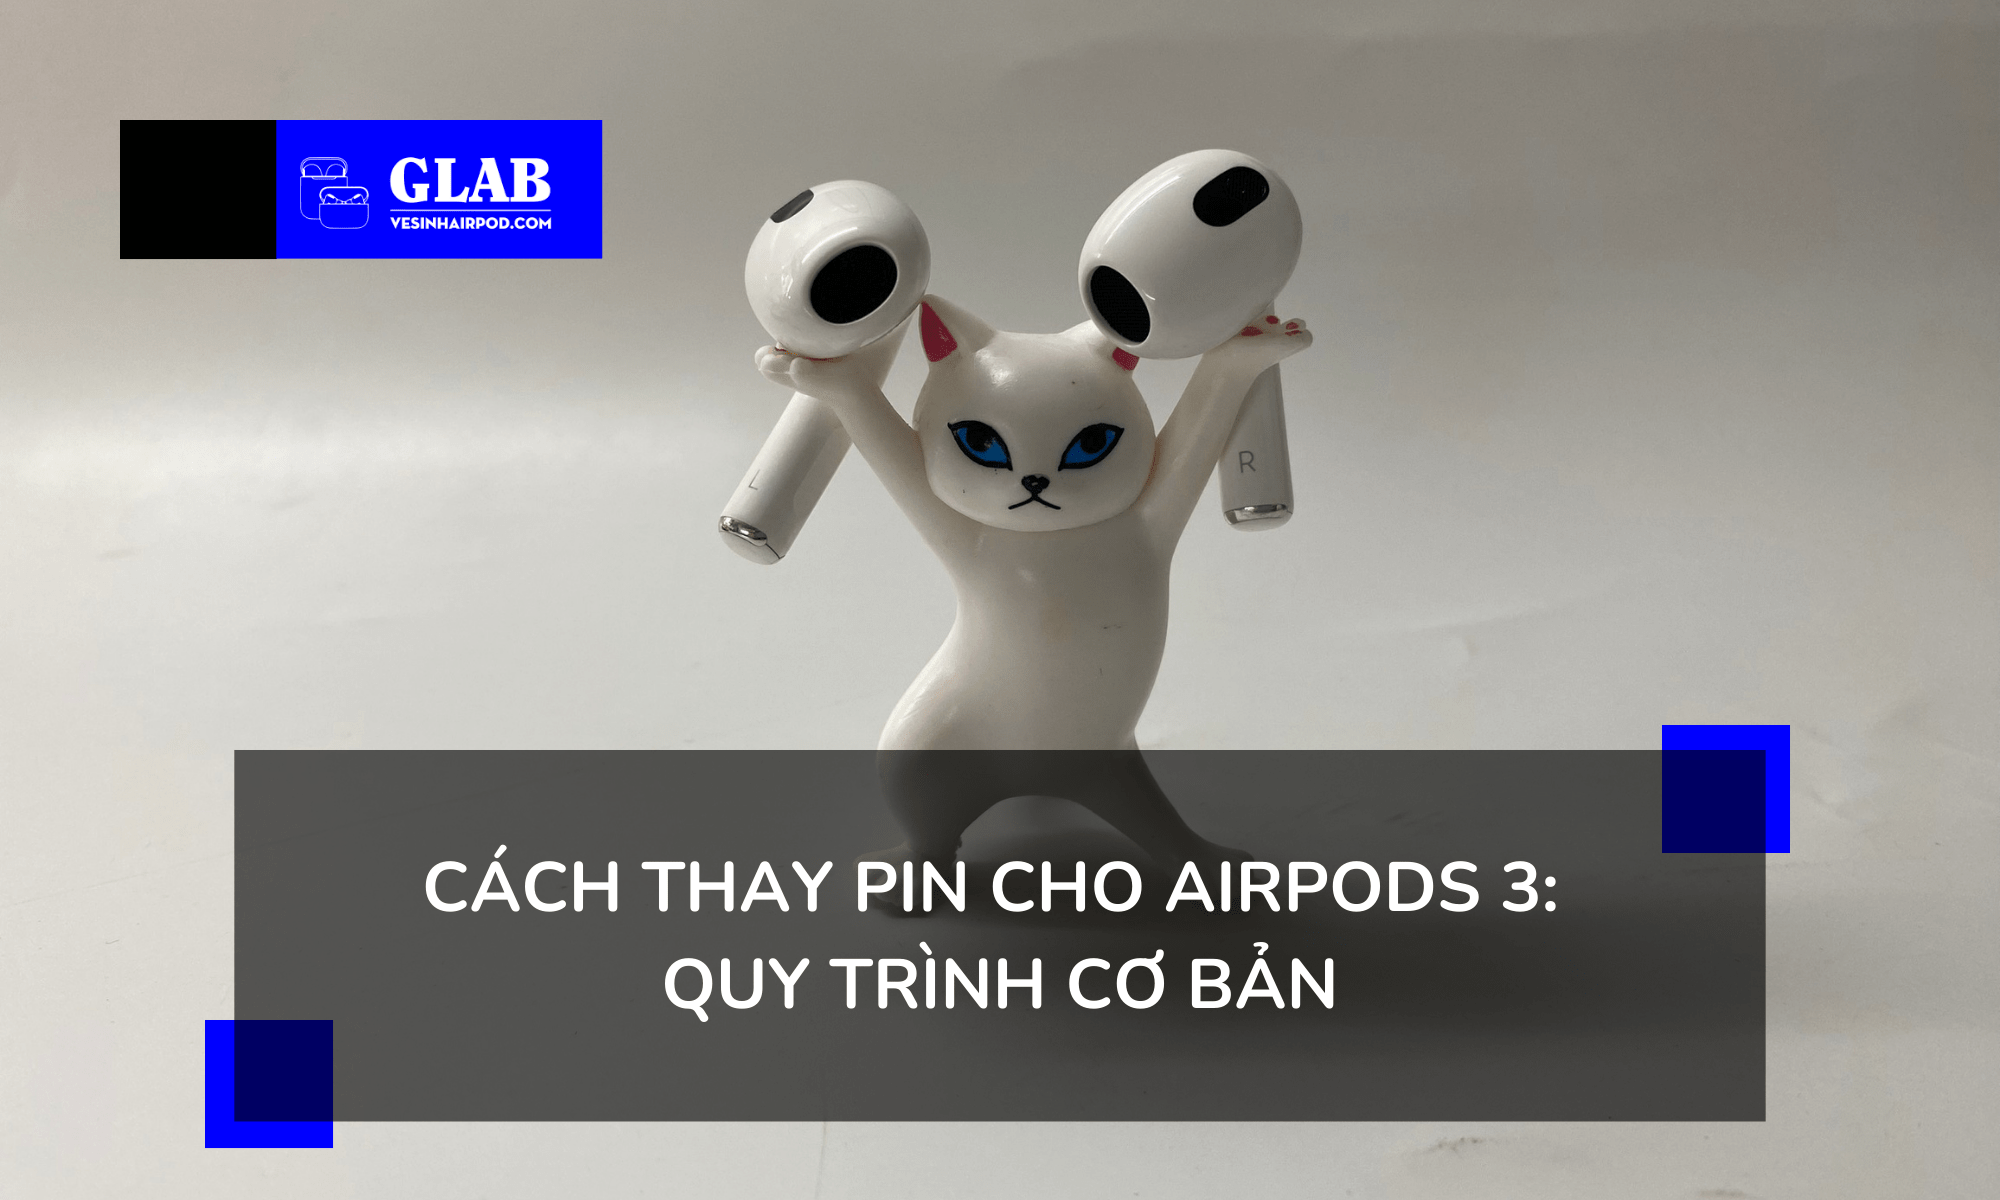 cach-thay-pin-airpods-3